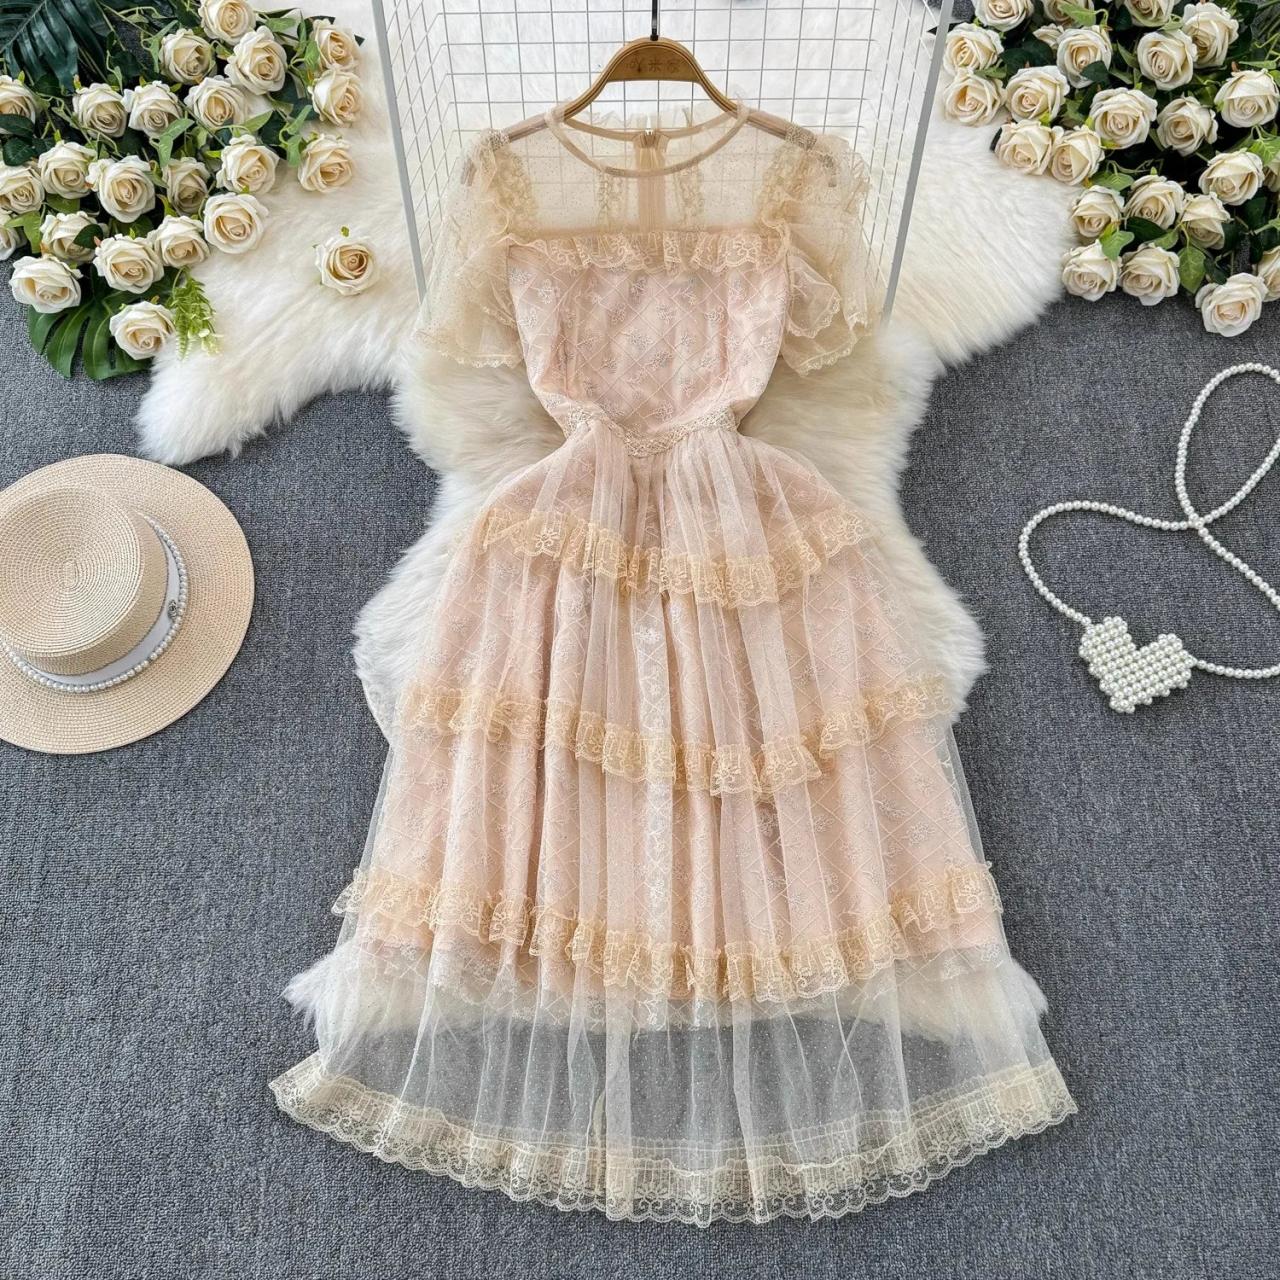 Vintage-inspired Lace Tulle Midi Dress With Sleeves